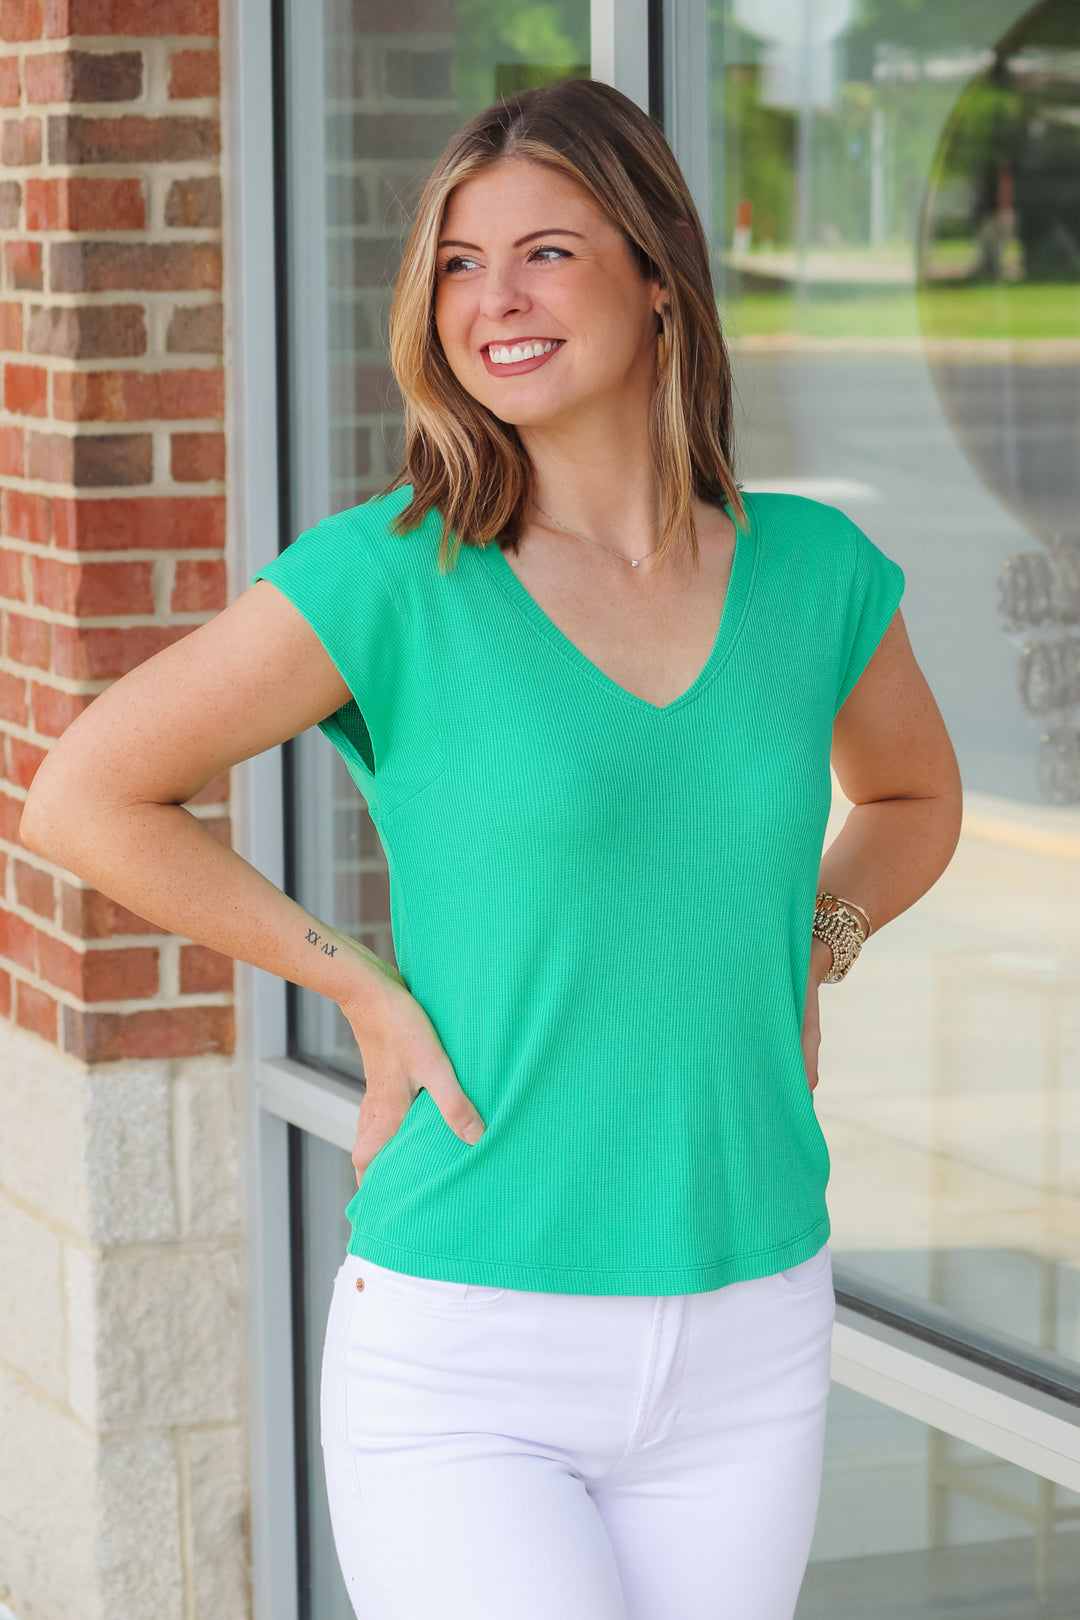 A brunette woman wearing a green shirt with cap sleeves and a v neck. She is standing in front of a shop.